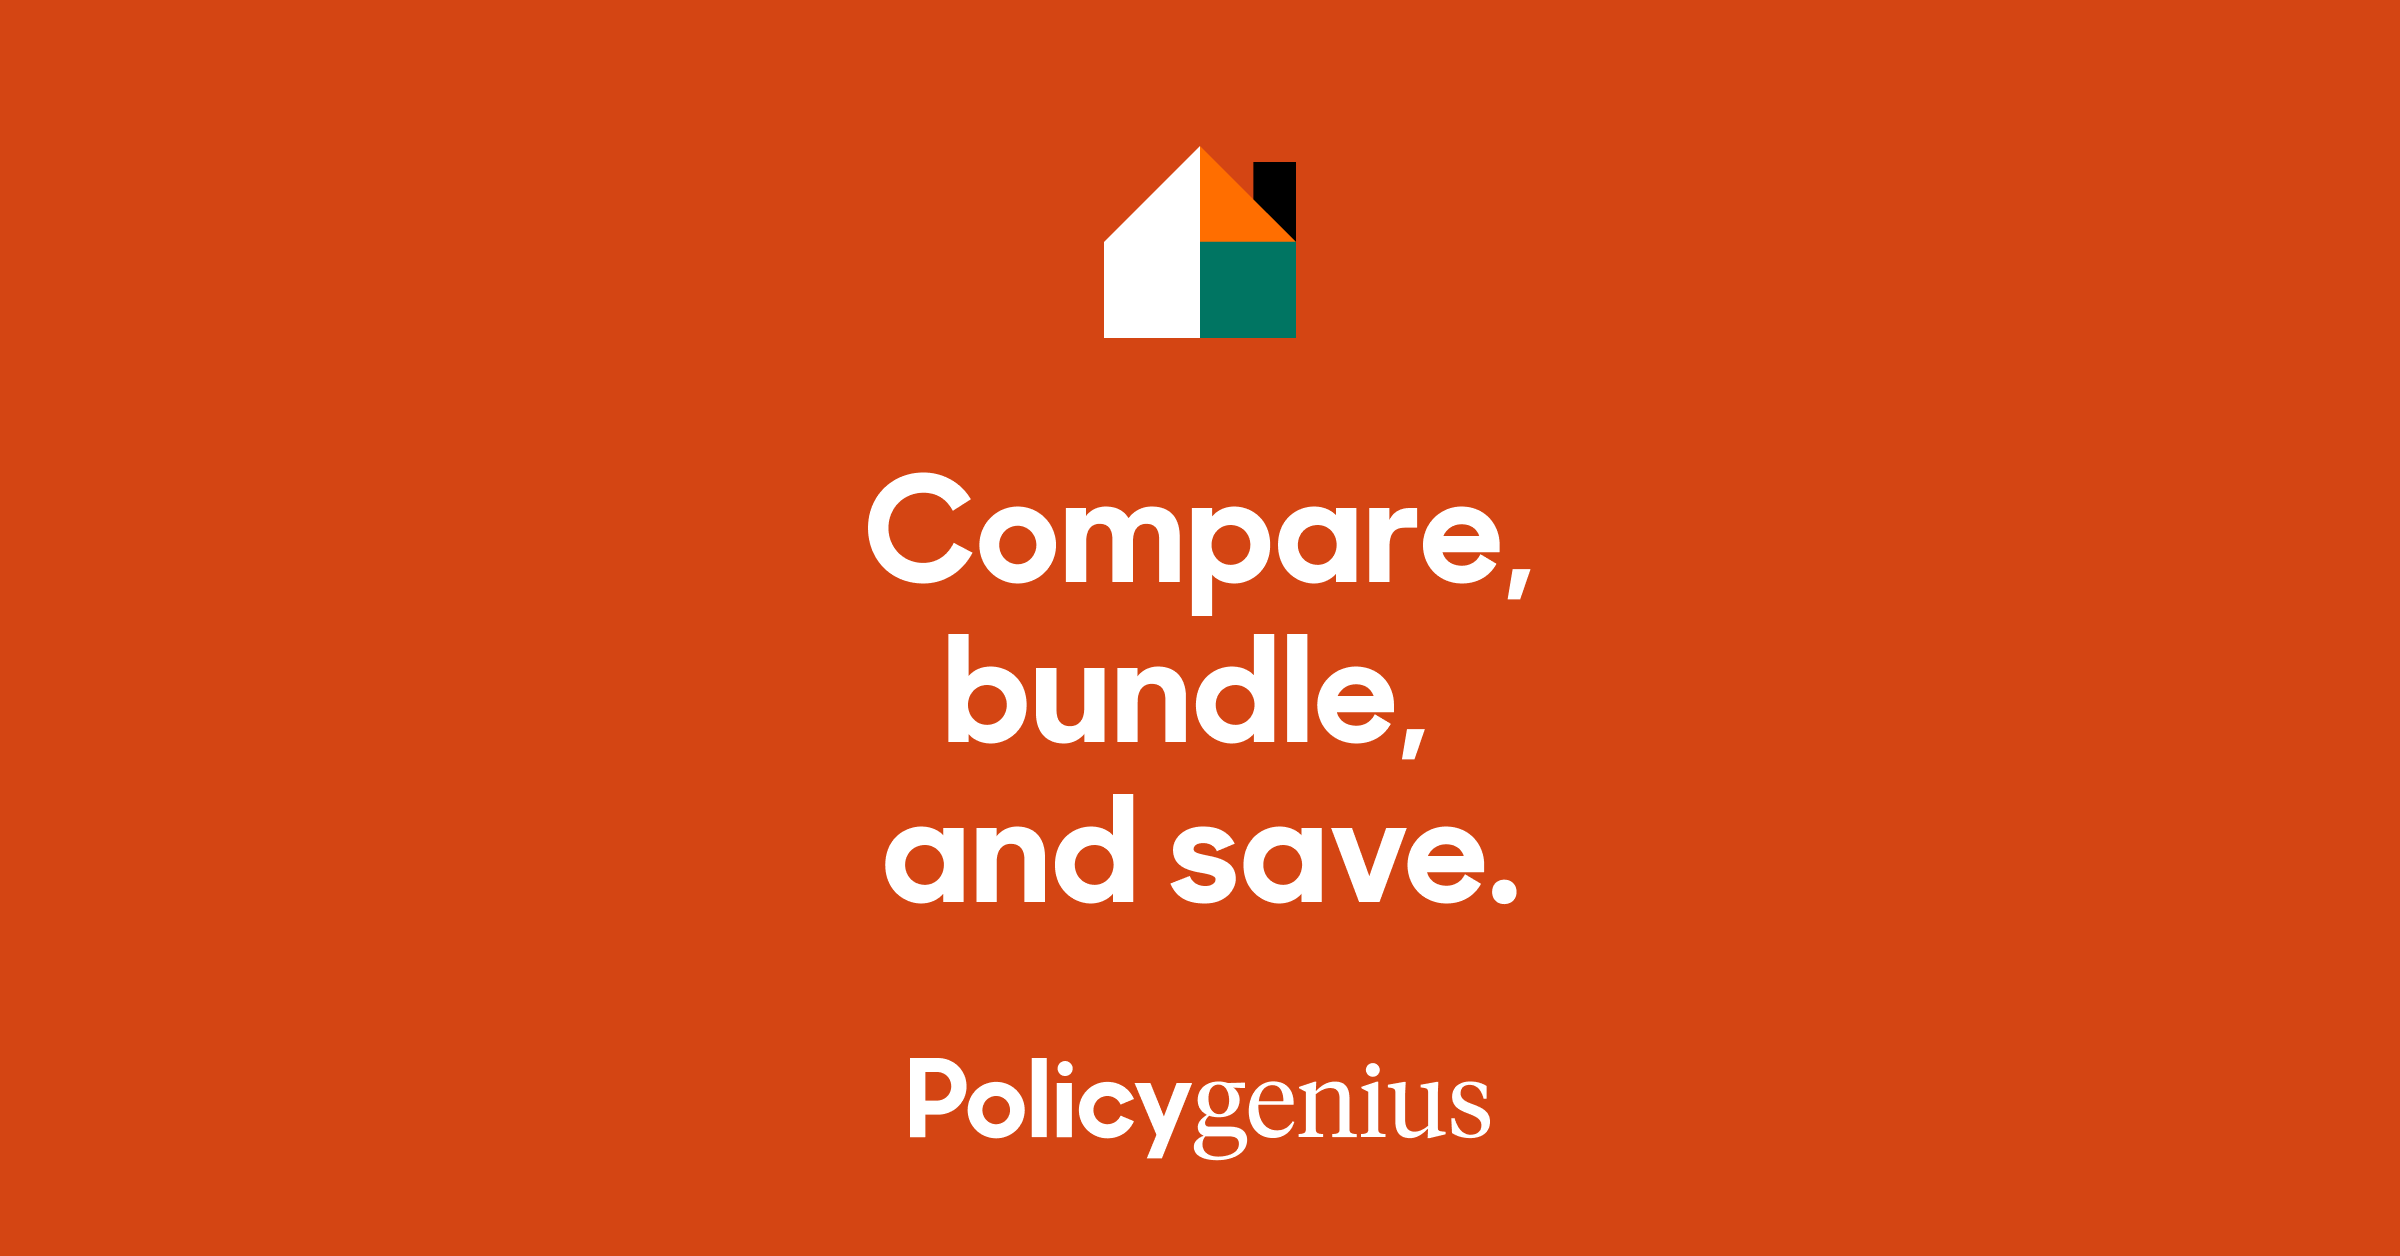 Does Homeowners Insurance Cover Bed Bugs? - Policygenius